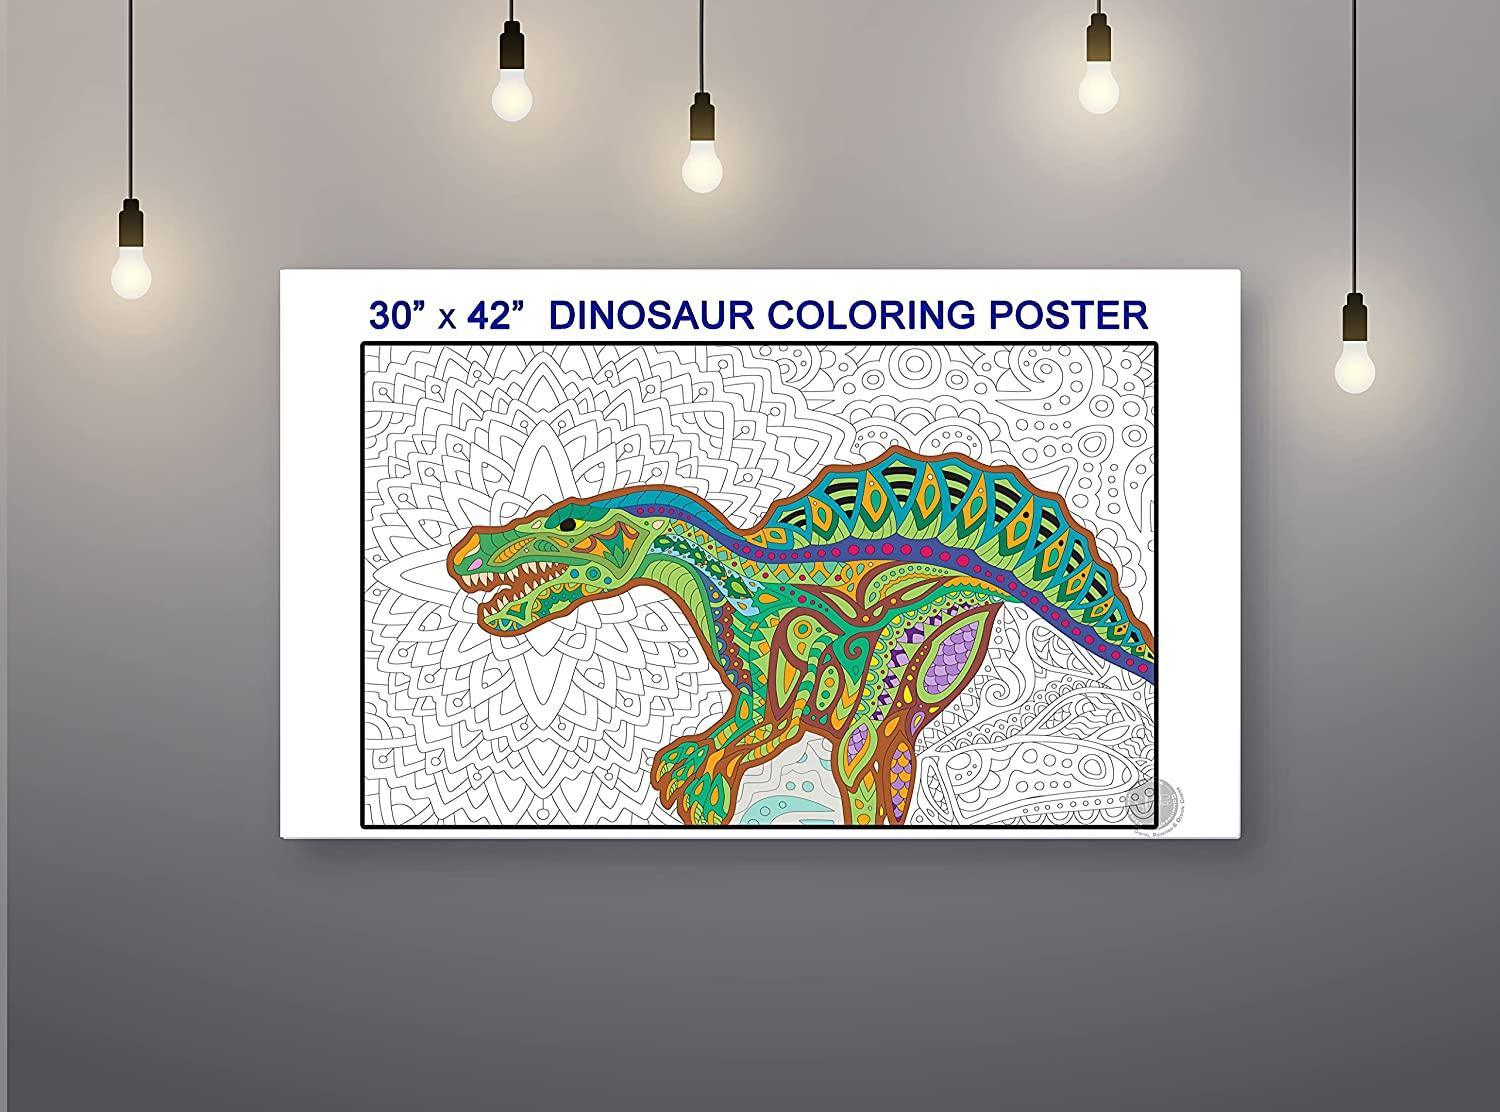 Giant Coloring Poster Dinosaur 30 X 72 Inches Crafts for Kids Ages 4-8  Birthday Gifts for Boys Big Jumbo Color Book Pages Large Pape 